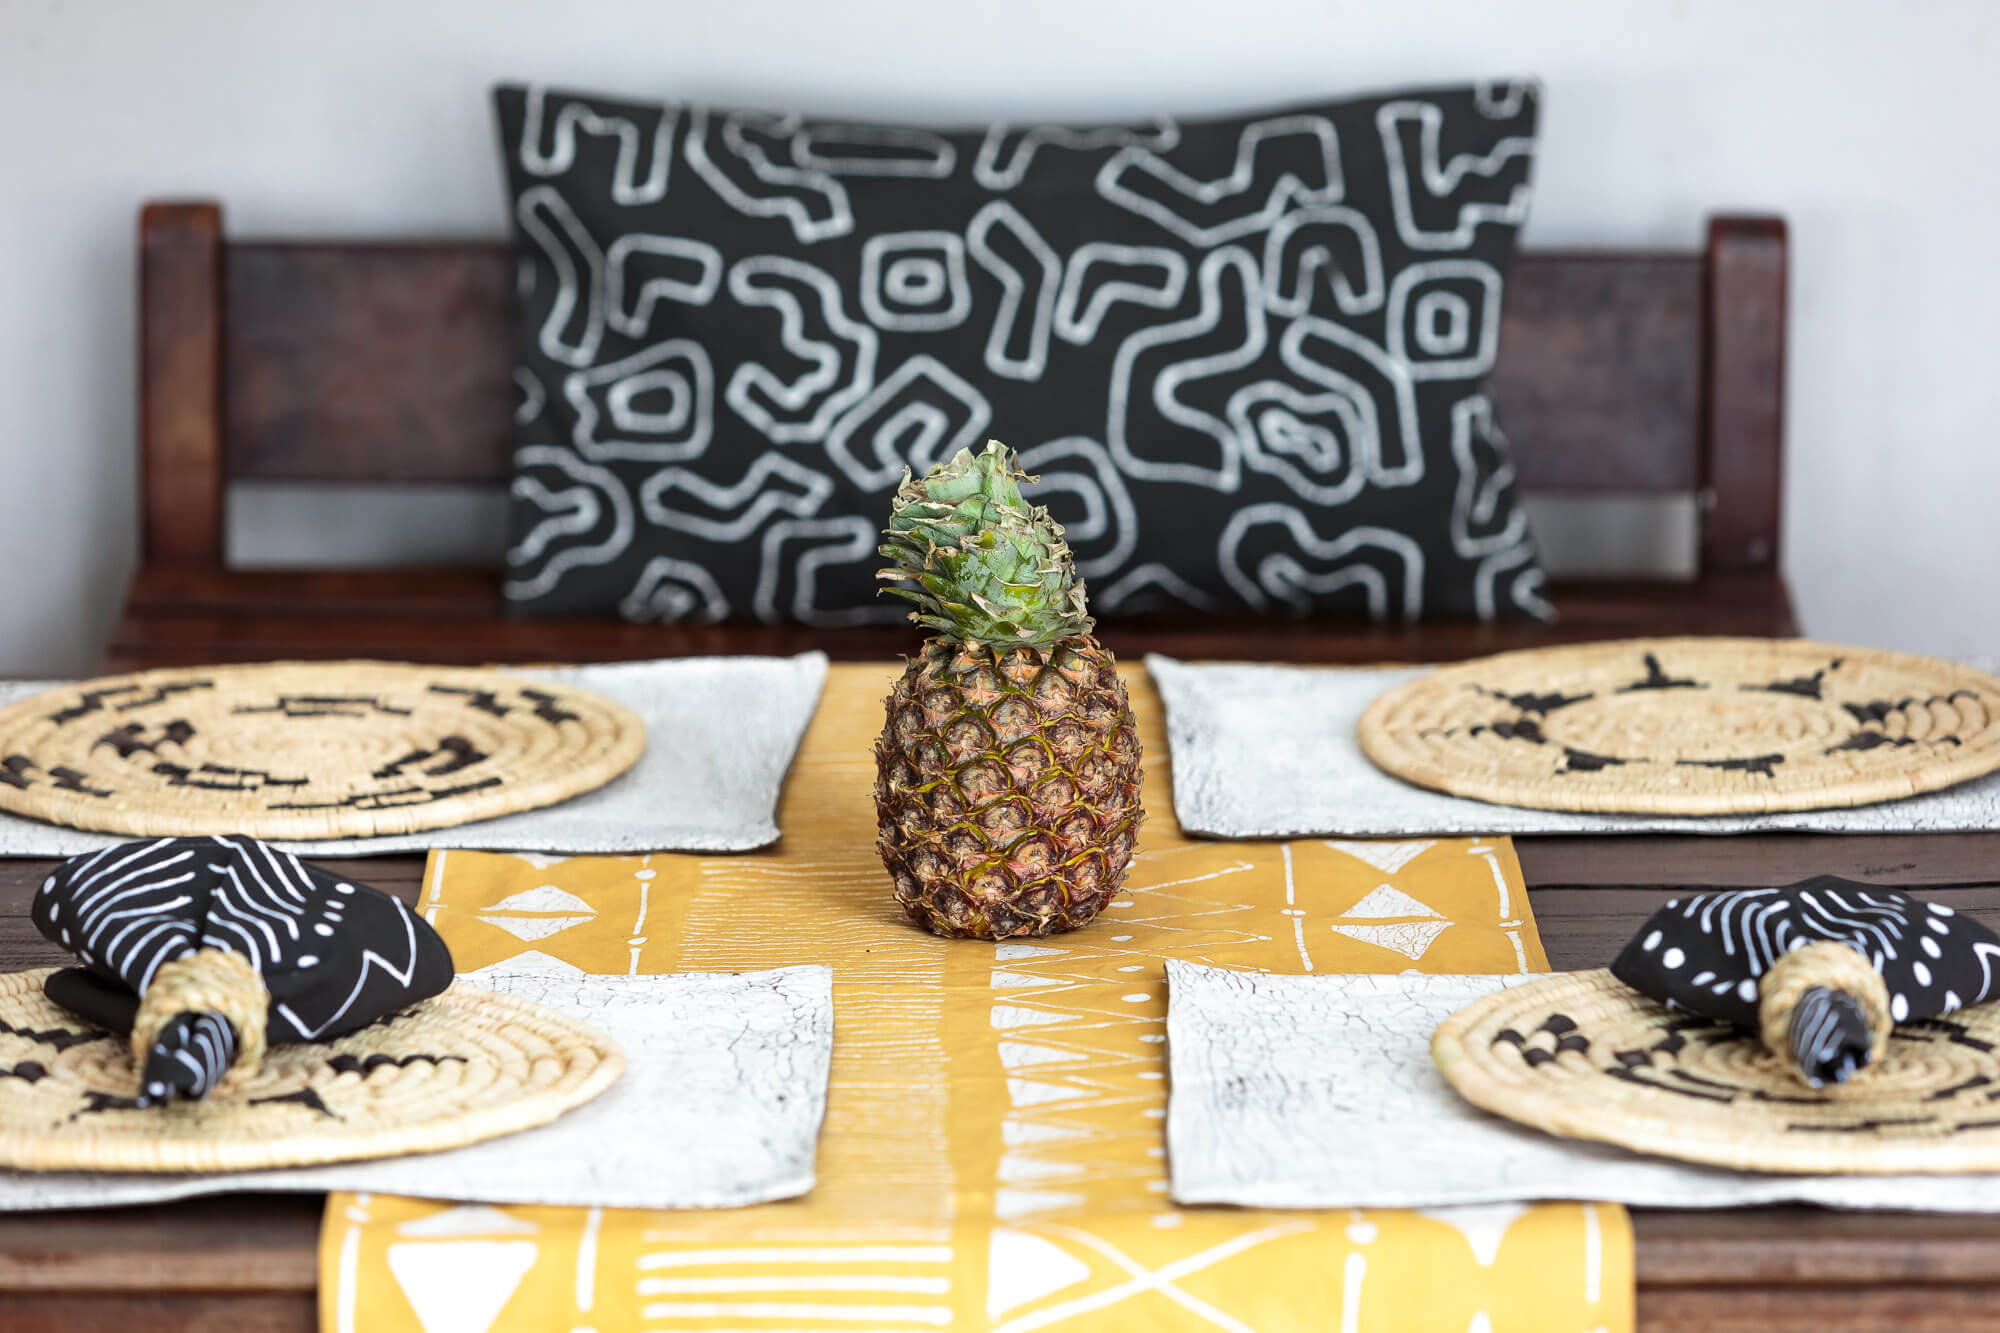 African made charcoal napkins, using 100% cotton to wow your elegant minimalist space in sustainable style.